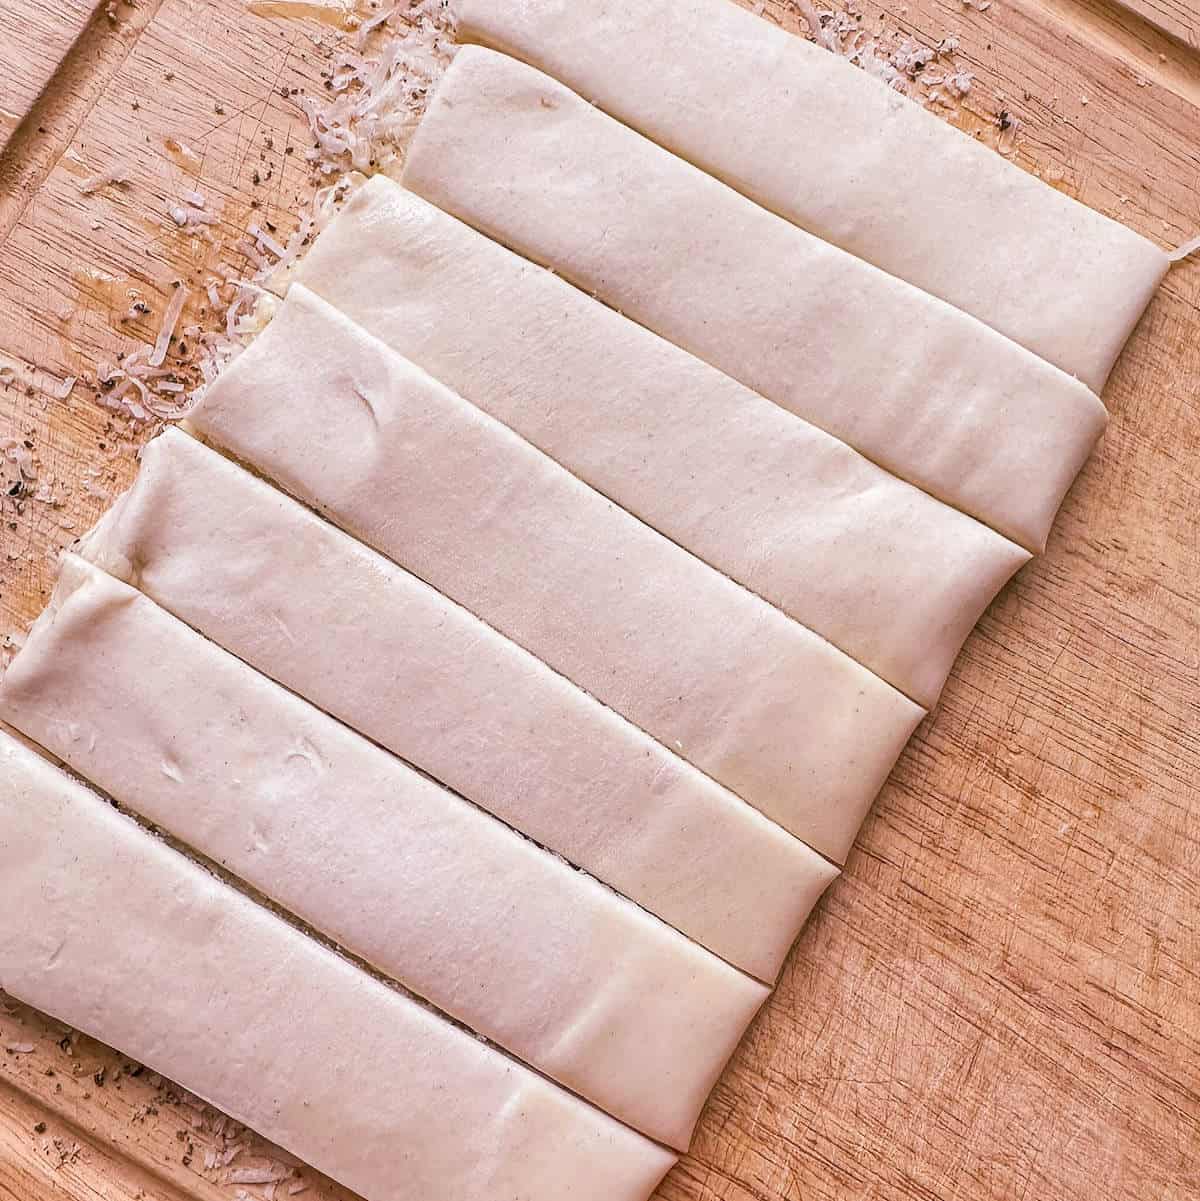 A piece of puff pastry cut into strips to make puff pastry twists. 